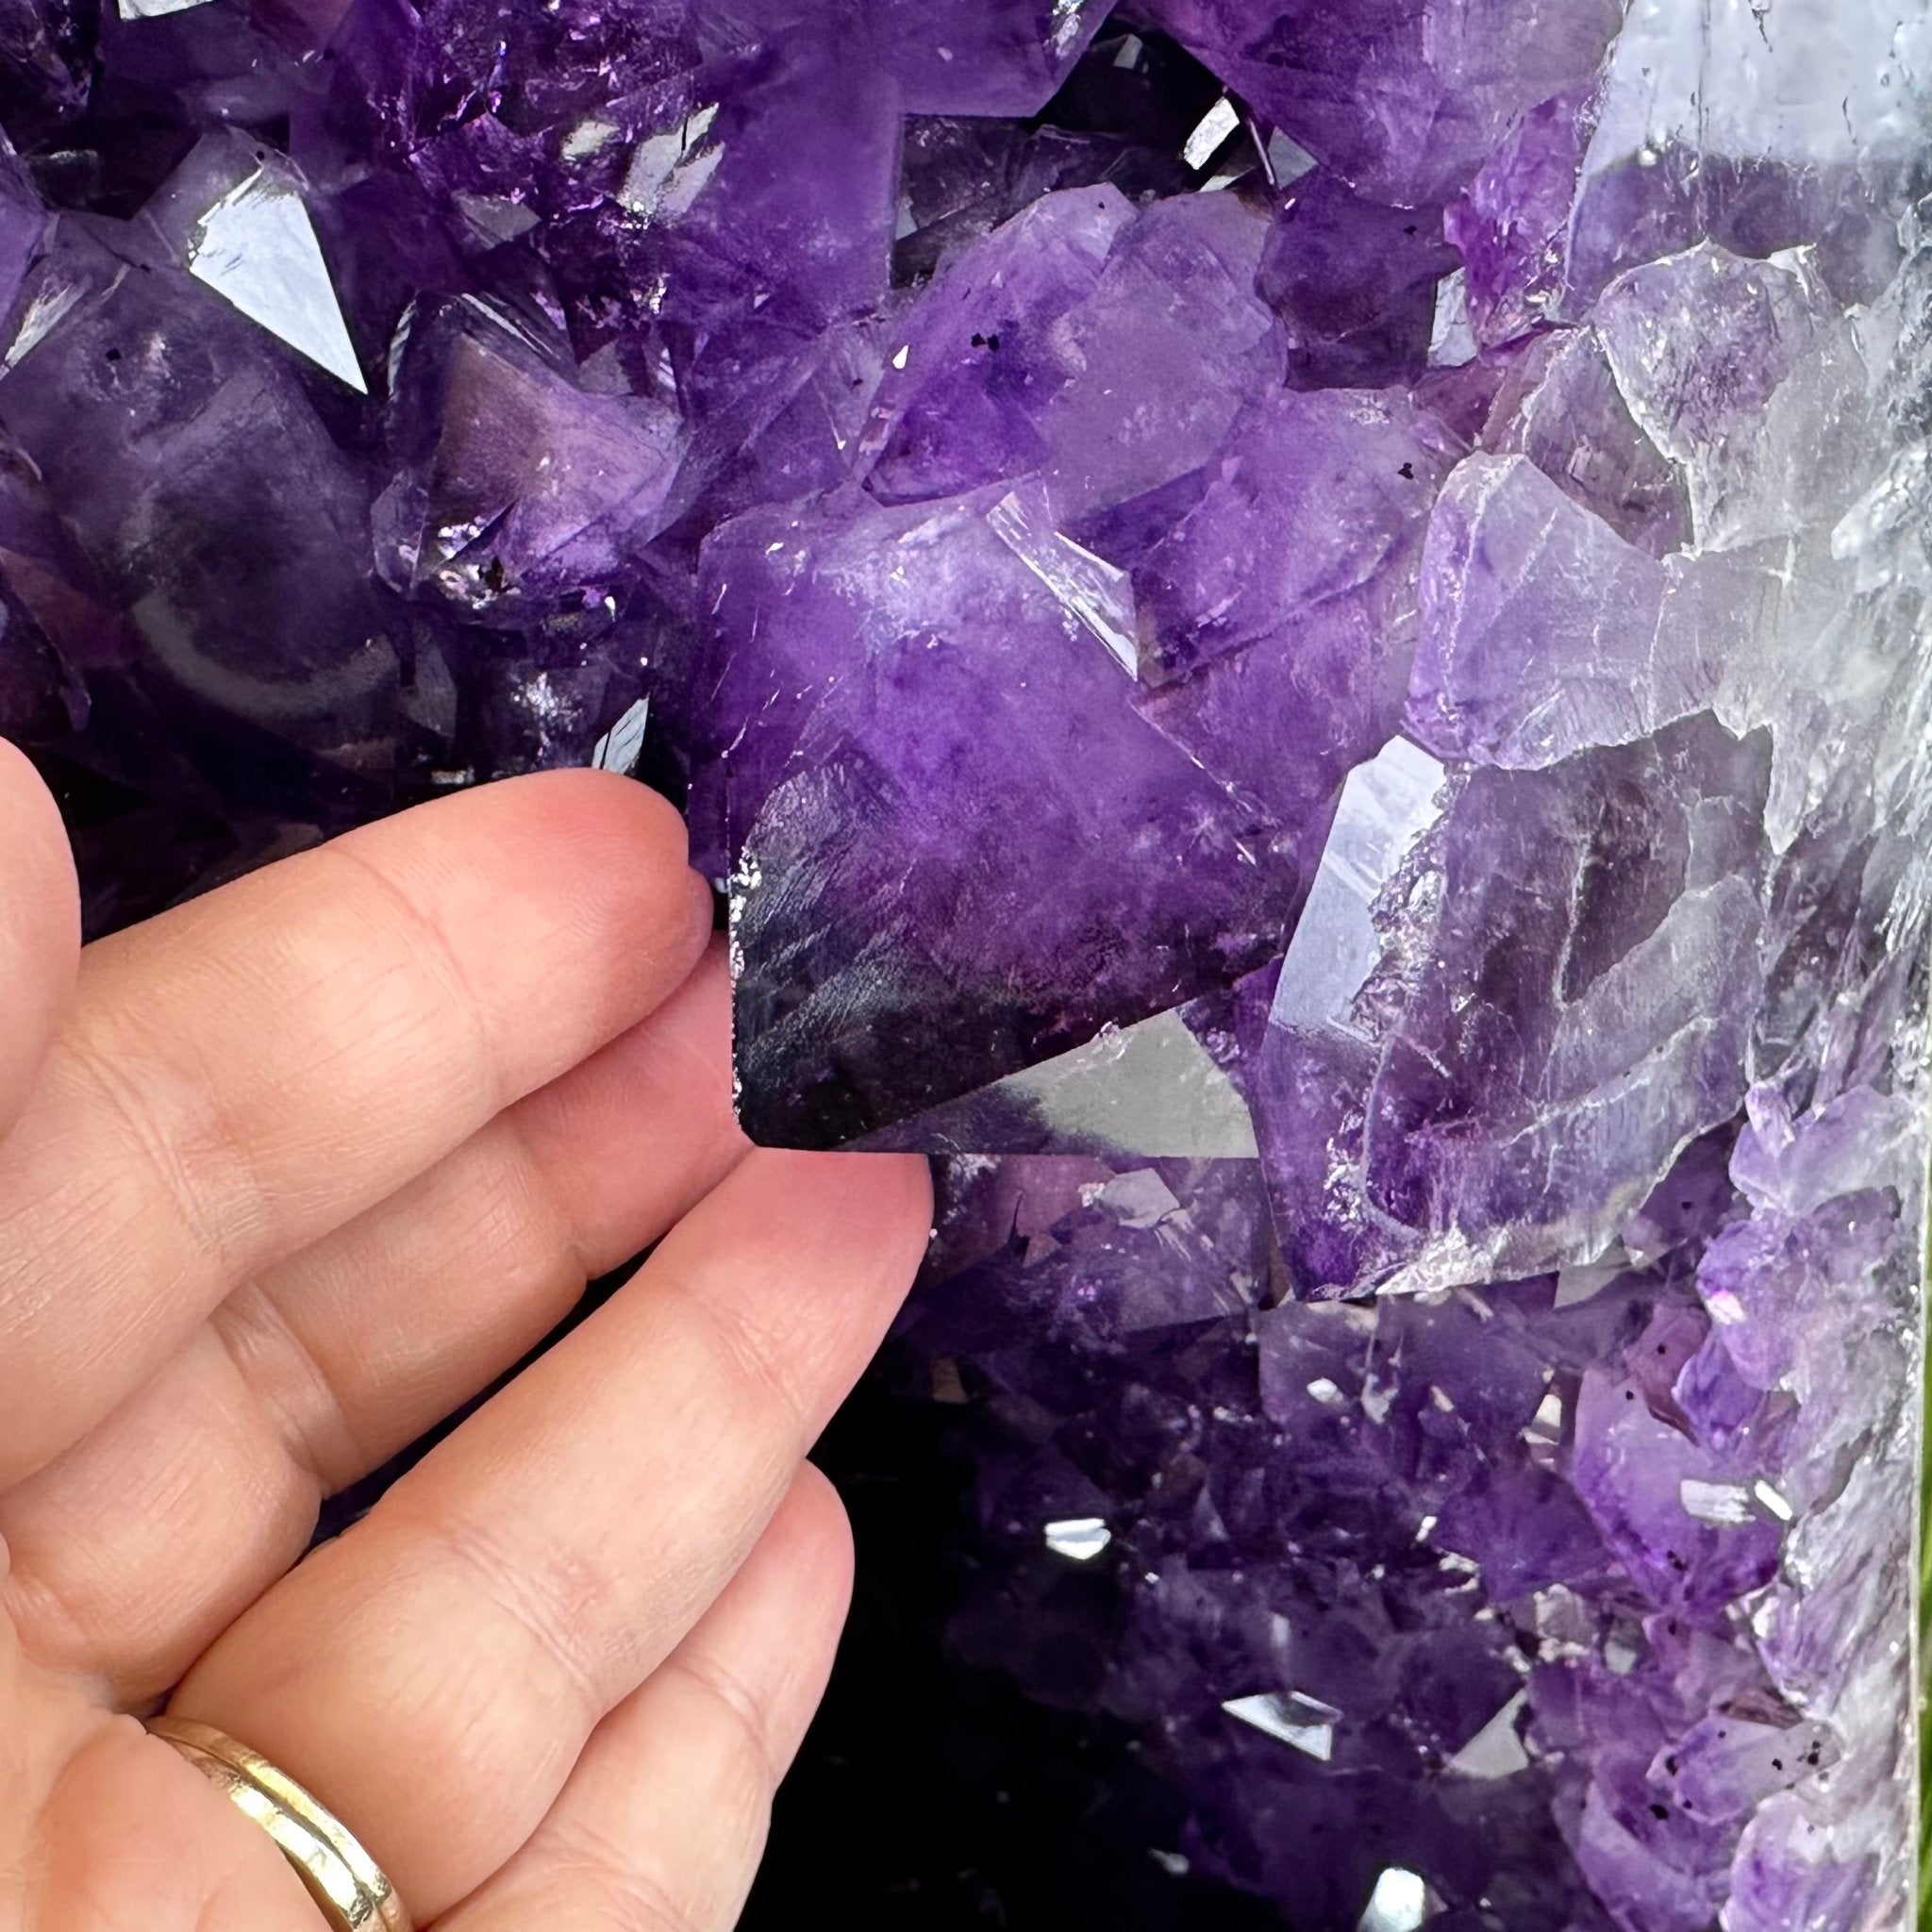 Super Quality Brazilian Amethyst Cathedral, 87.8 lbs & 27.6" Tall, Model #5601-0994 by Brazil Gems - Brazil GemsBrazil GemsSuper Quality Brazilian Amethyst Cathedral, 87.8 lbs & 27.6" Tall, Model #5601-0994 by Brazil GemsCathedrals5601-0994